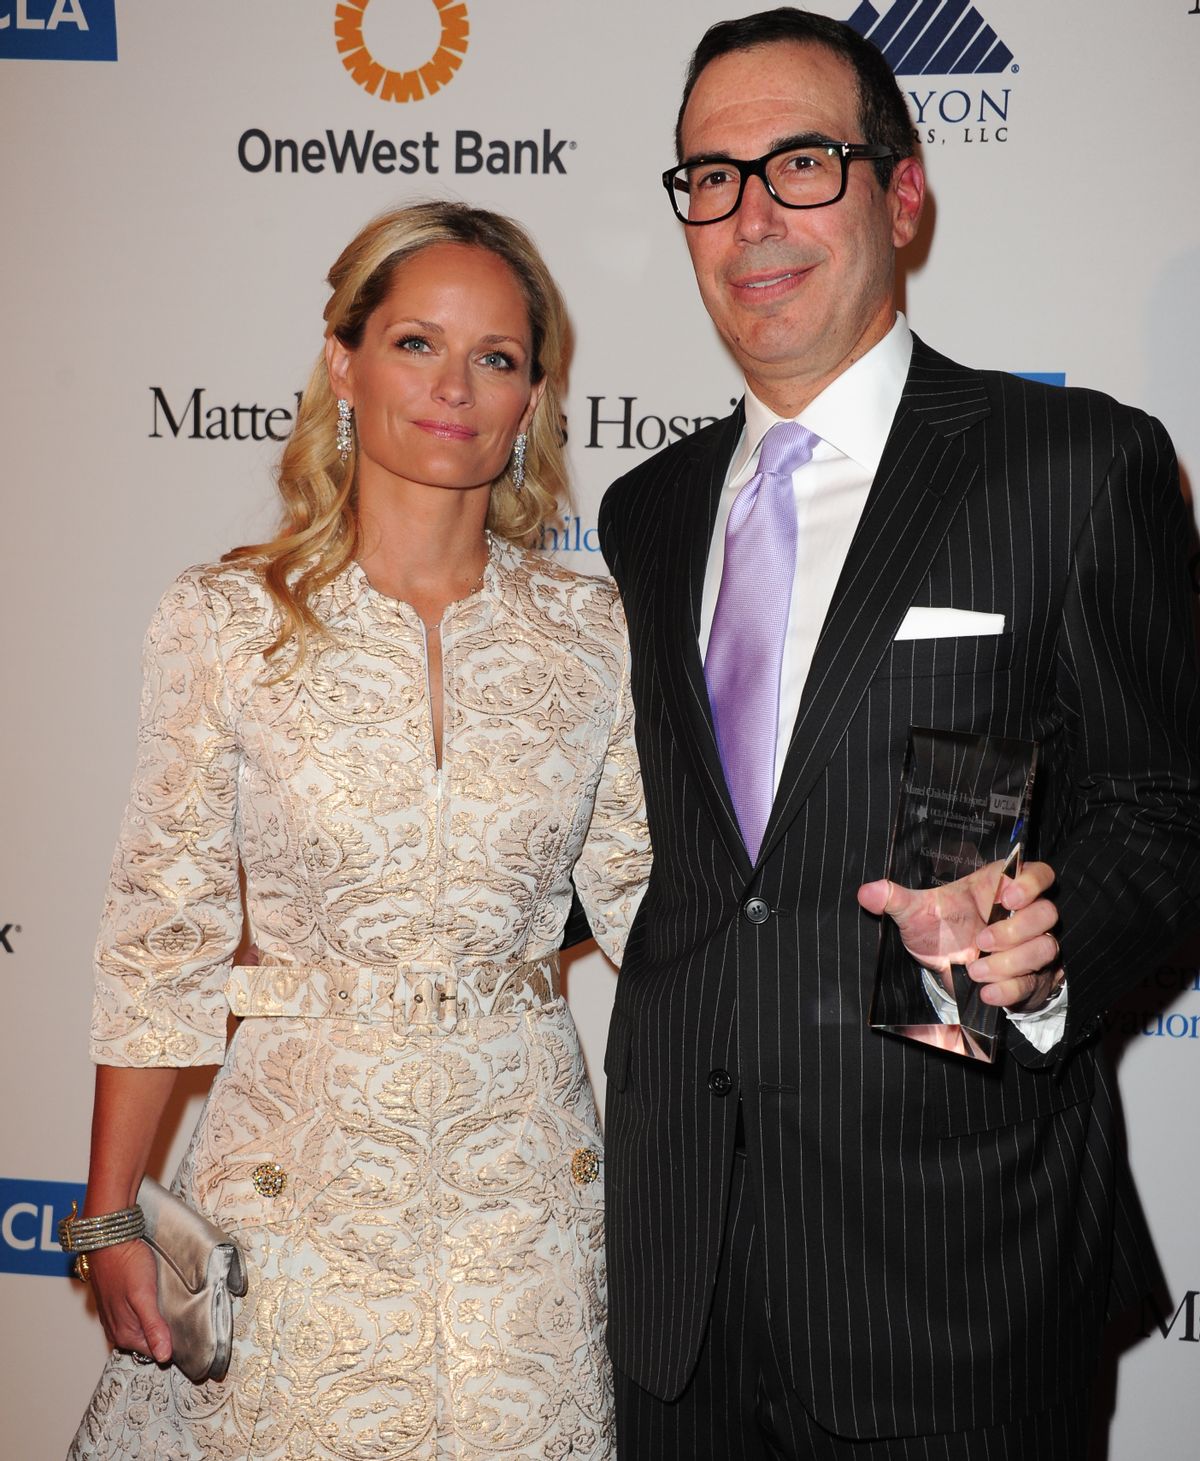 FILE - In this April 17, 2013 file photo, Heather Mnuchin, left, and Steven Mnuchin arrive at The Kaleidoscope Ball's "Designing The Future" at the Beverly Hills Hotel in Beverly Hills, Calif.  (Richard Shotwell/invision/ap)